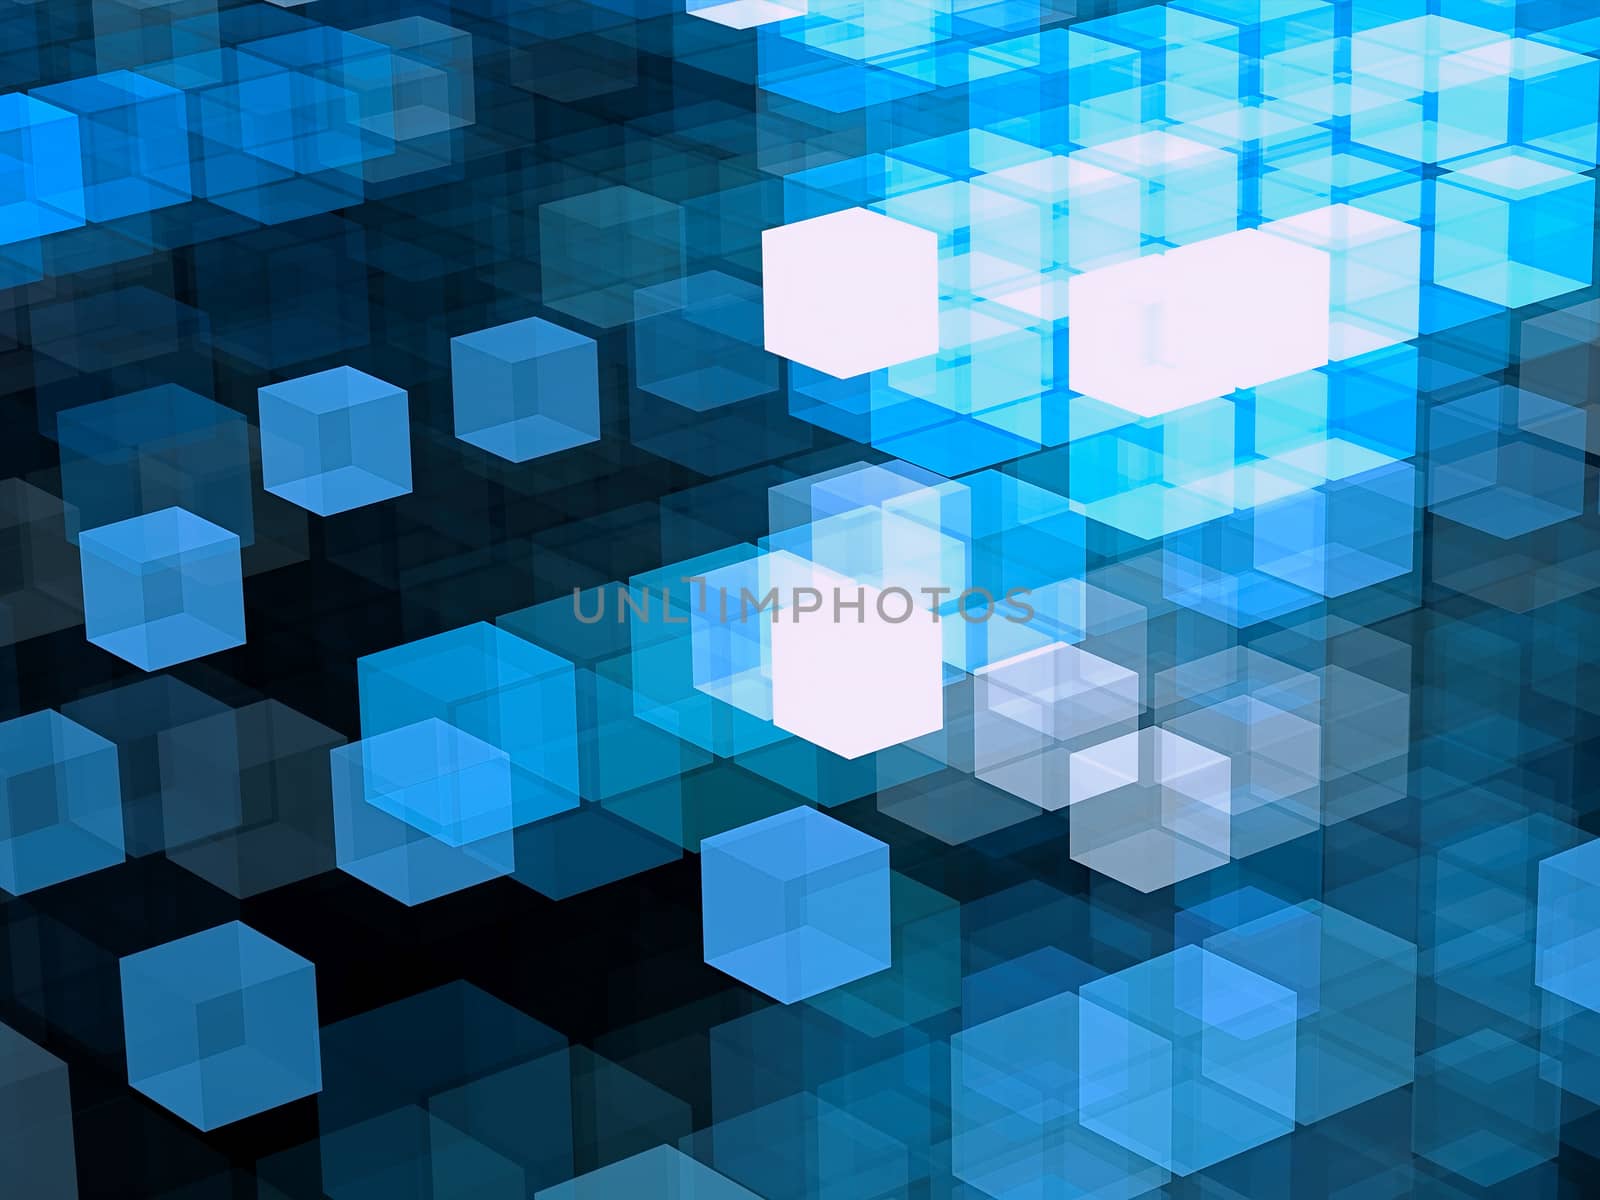 Sci-fi or technology fractal background. Futuristic structure of chaos glowing cubes. Abstract computer-generated image. Tech style wallpaper or backdrop for creative design projects.